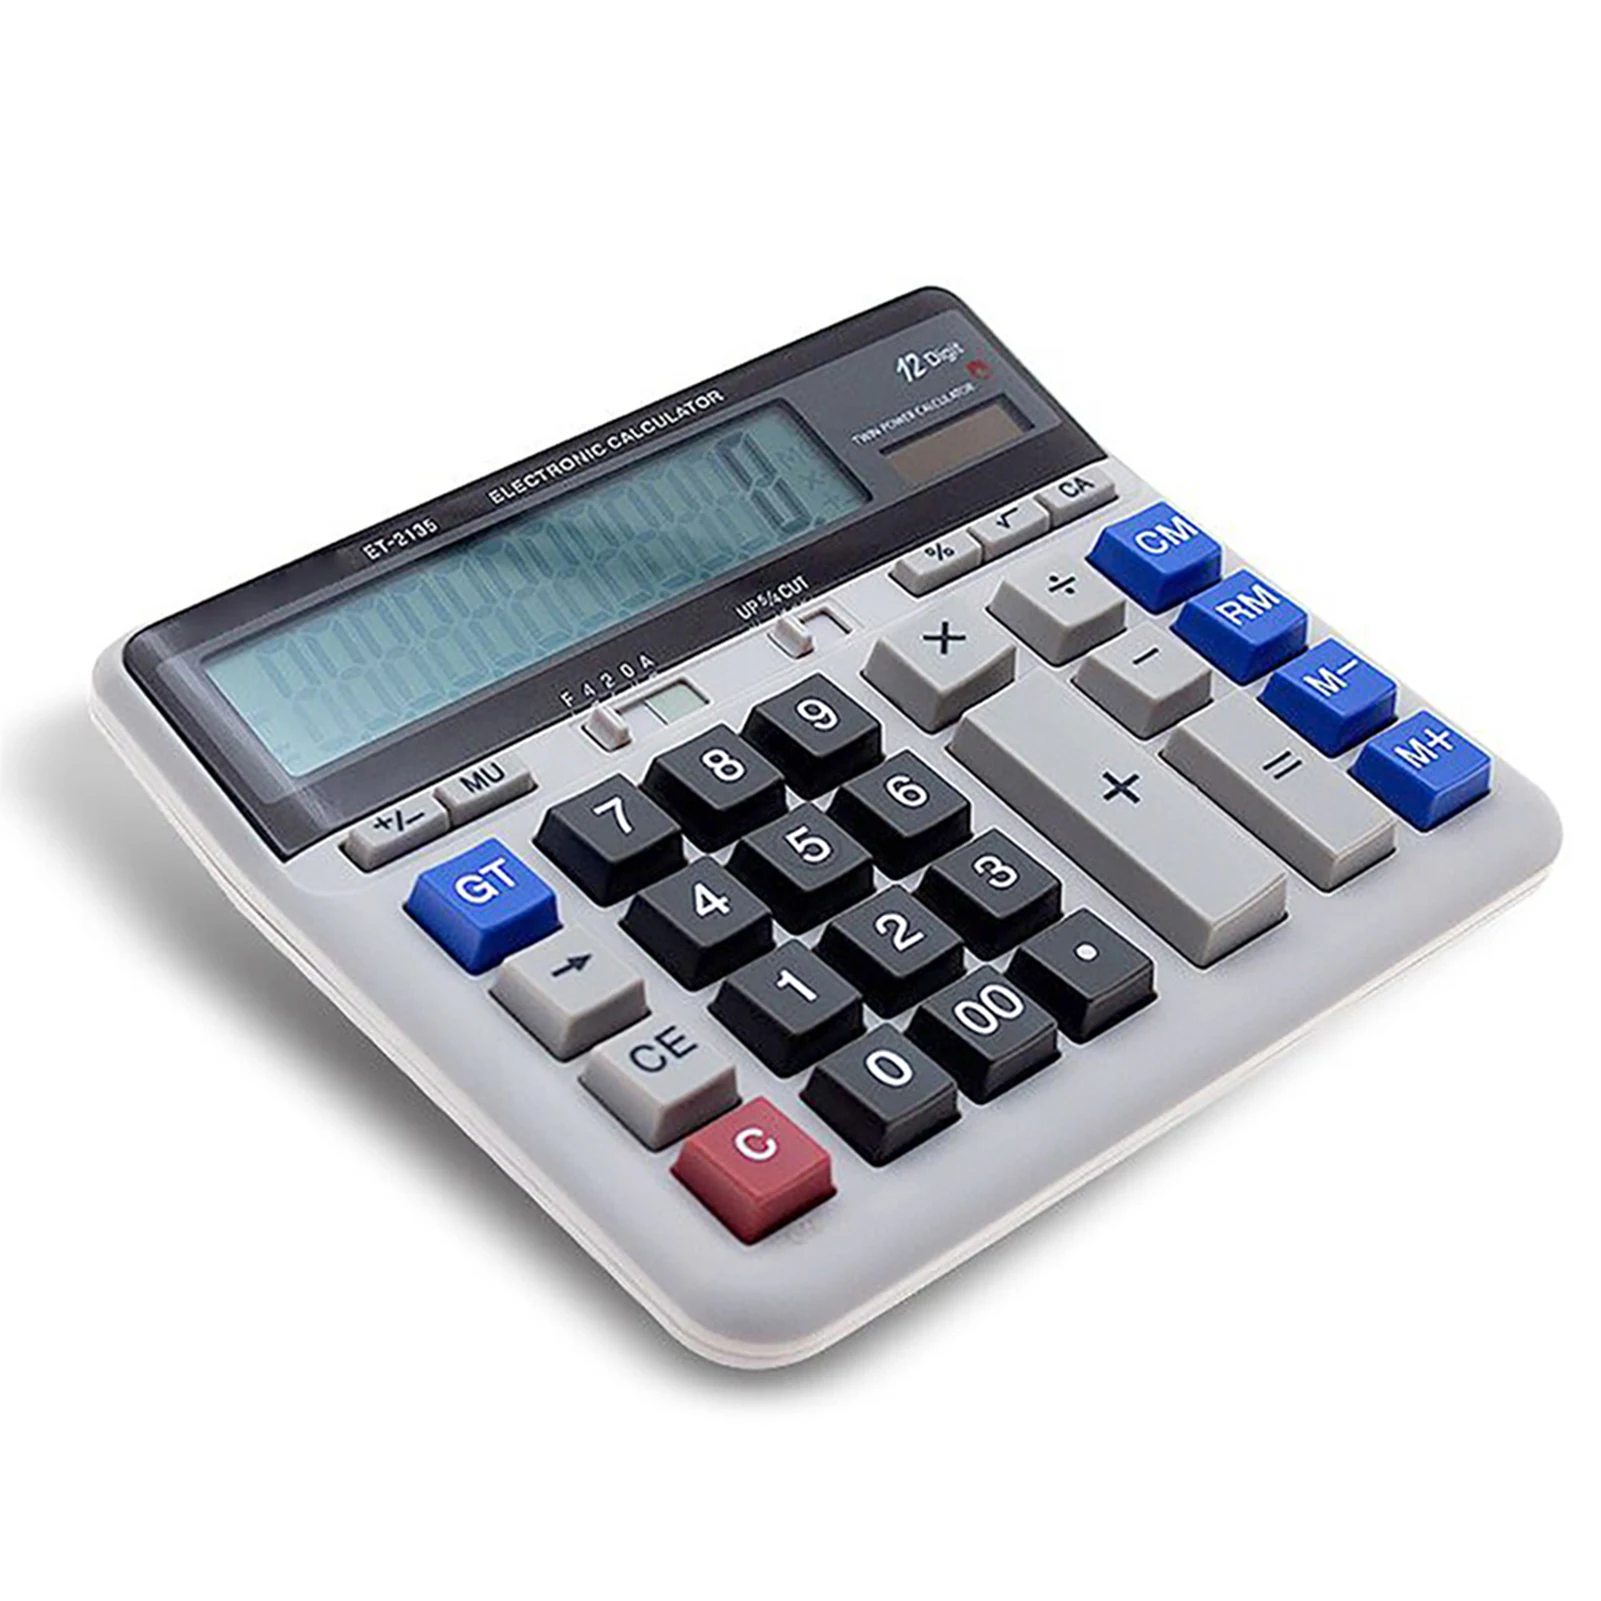 

Large Computer Electronic Calculator Counter Solar & Battery Power 12 Digit Display Multi-functional Big Button fo Calculating